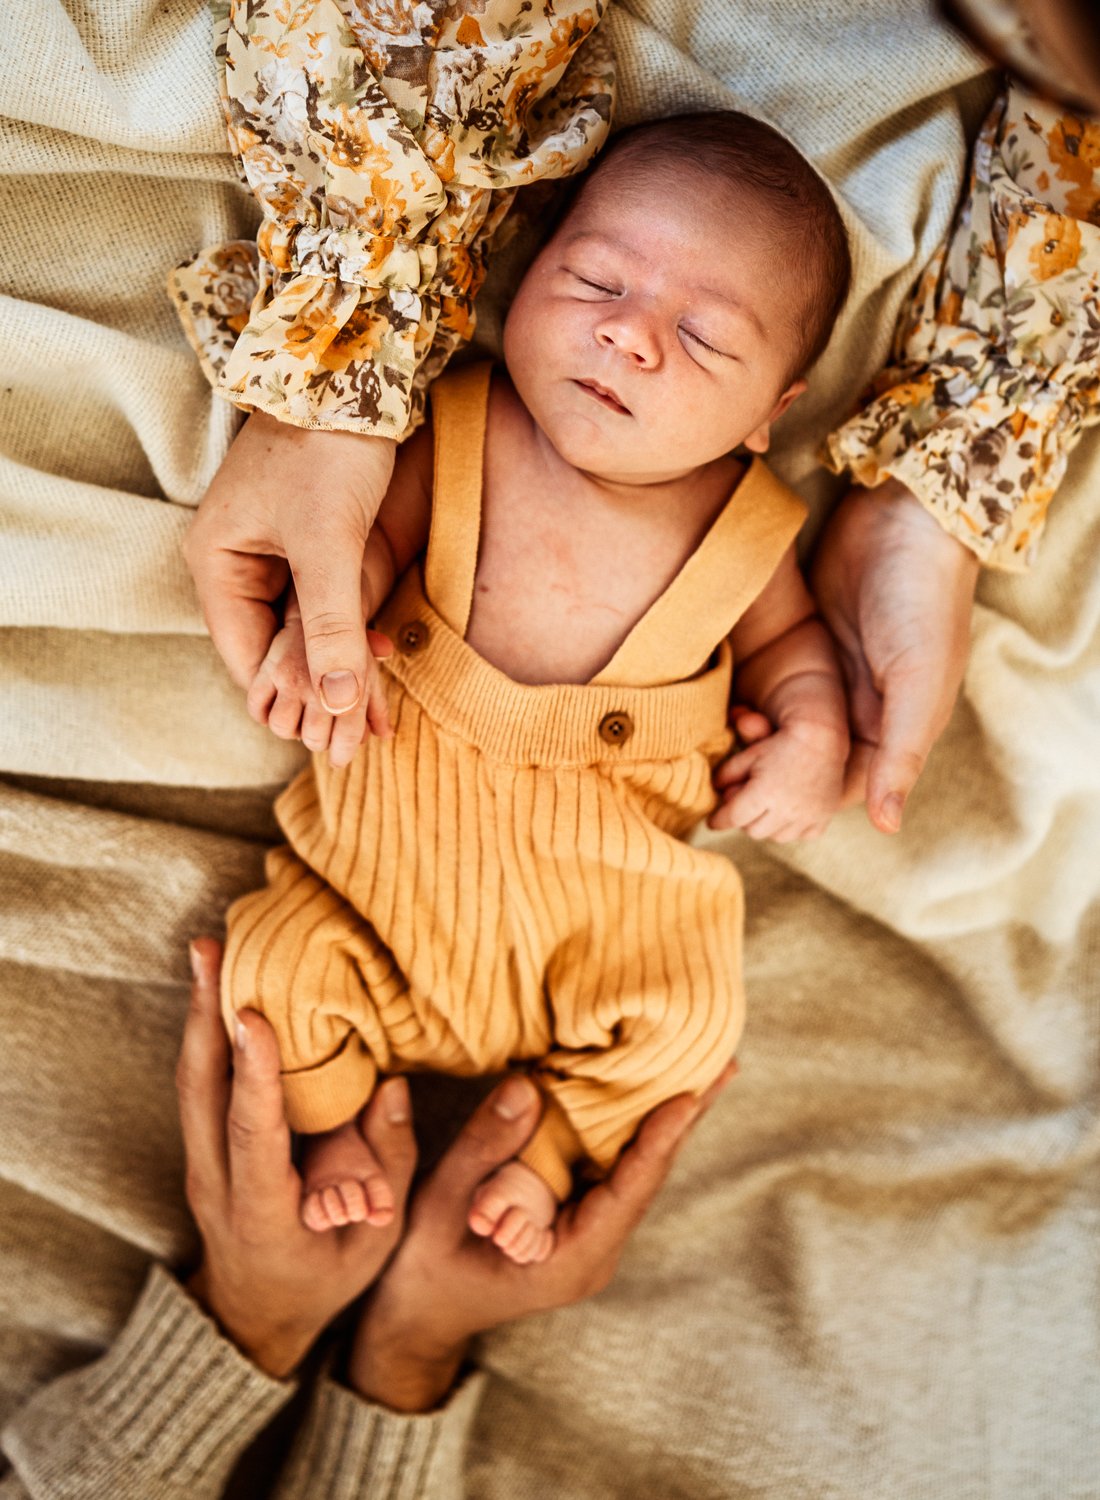 in-home-lifestyle-newborn-photography-session-ramstein-germany (12).jpg